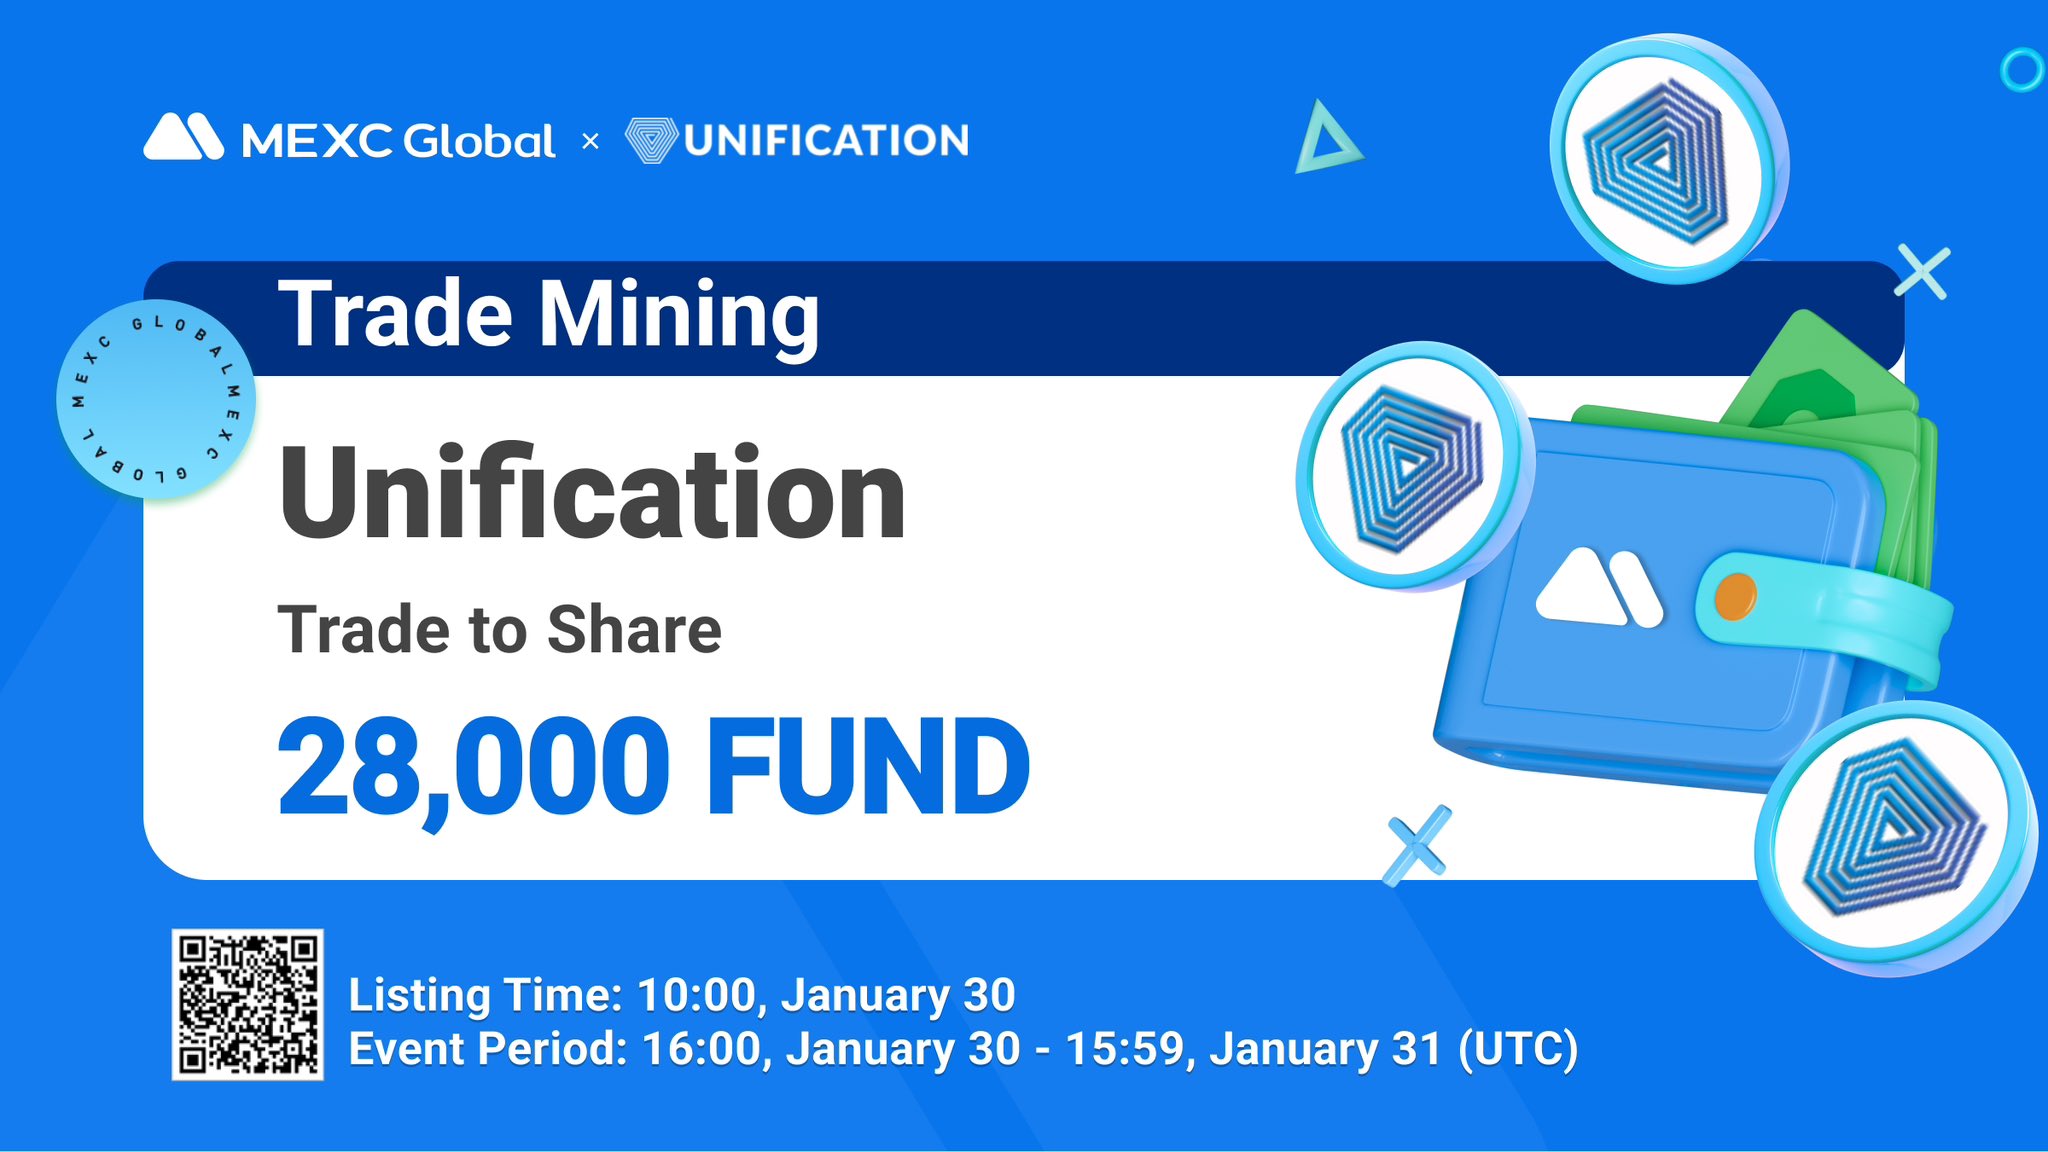 What is Unification (FUND)